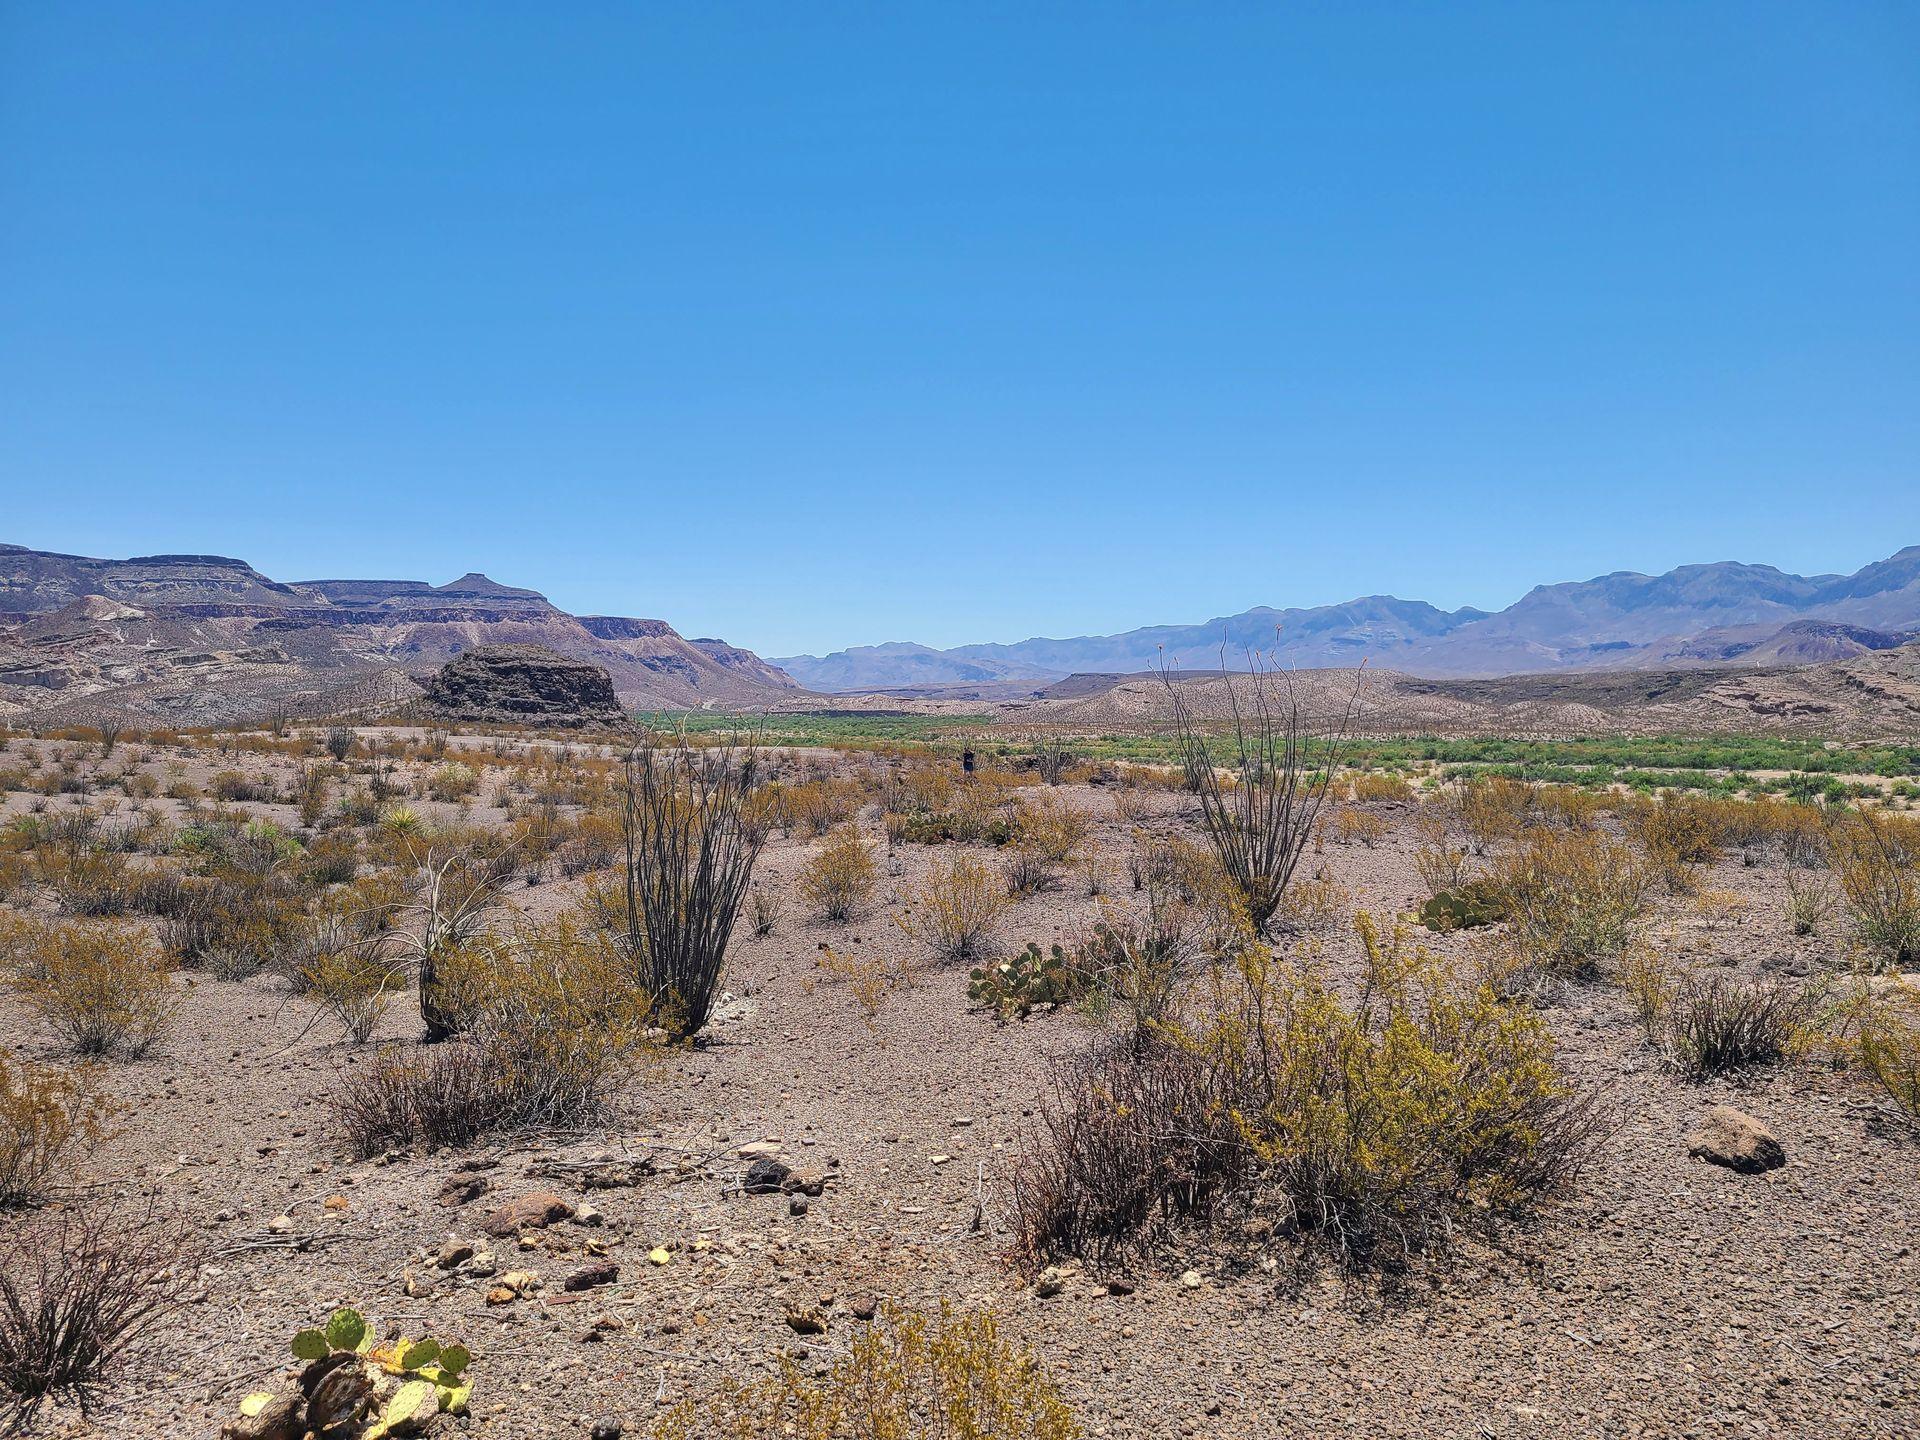 A desert landscape with mountains in the distance